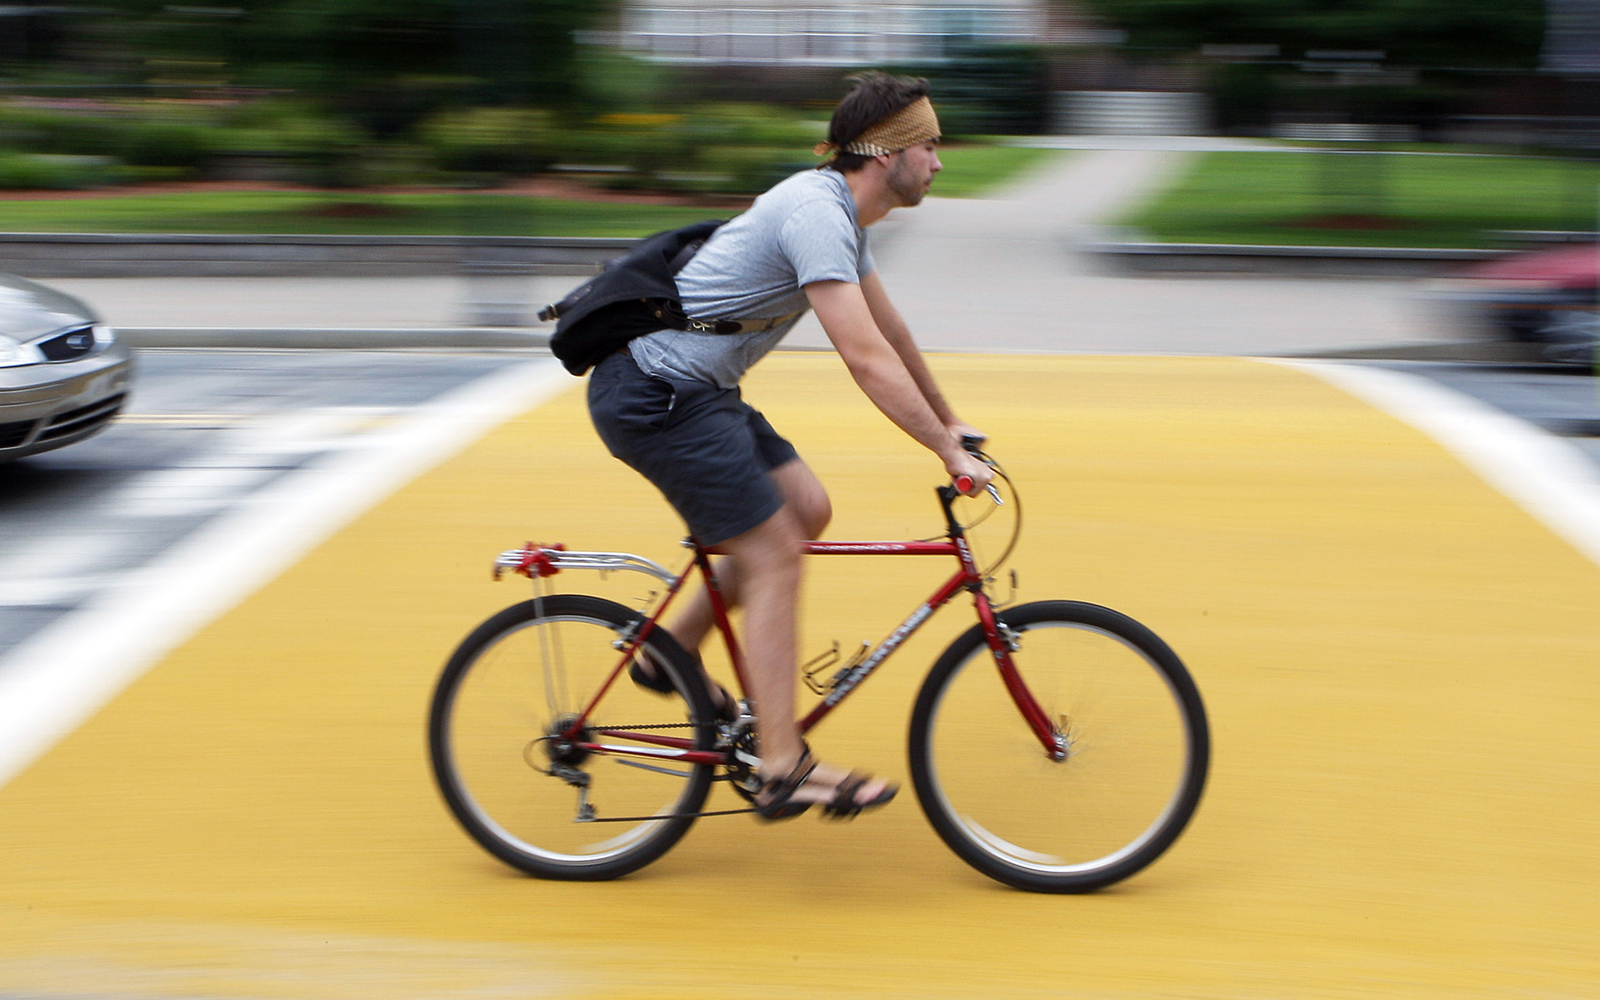 **ADVANCE FOR MONDAY, SEPT. 15, AND THEREAFTER** Eric Hultgren, 22, a senior at UMass-Lowell, rides his bicycle on campus in Lowell, Mass. Friday, August 1, 2008. Hultgren can't afford high gasoline prices, so he's ditched his car for a Mongoose 8-speed. (AP Photo/Elise Amendola)